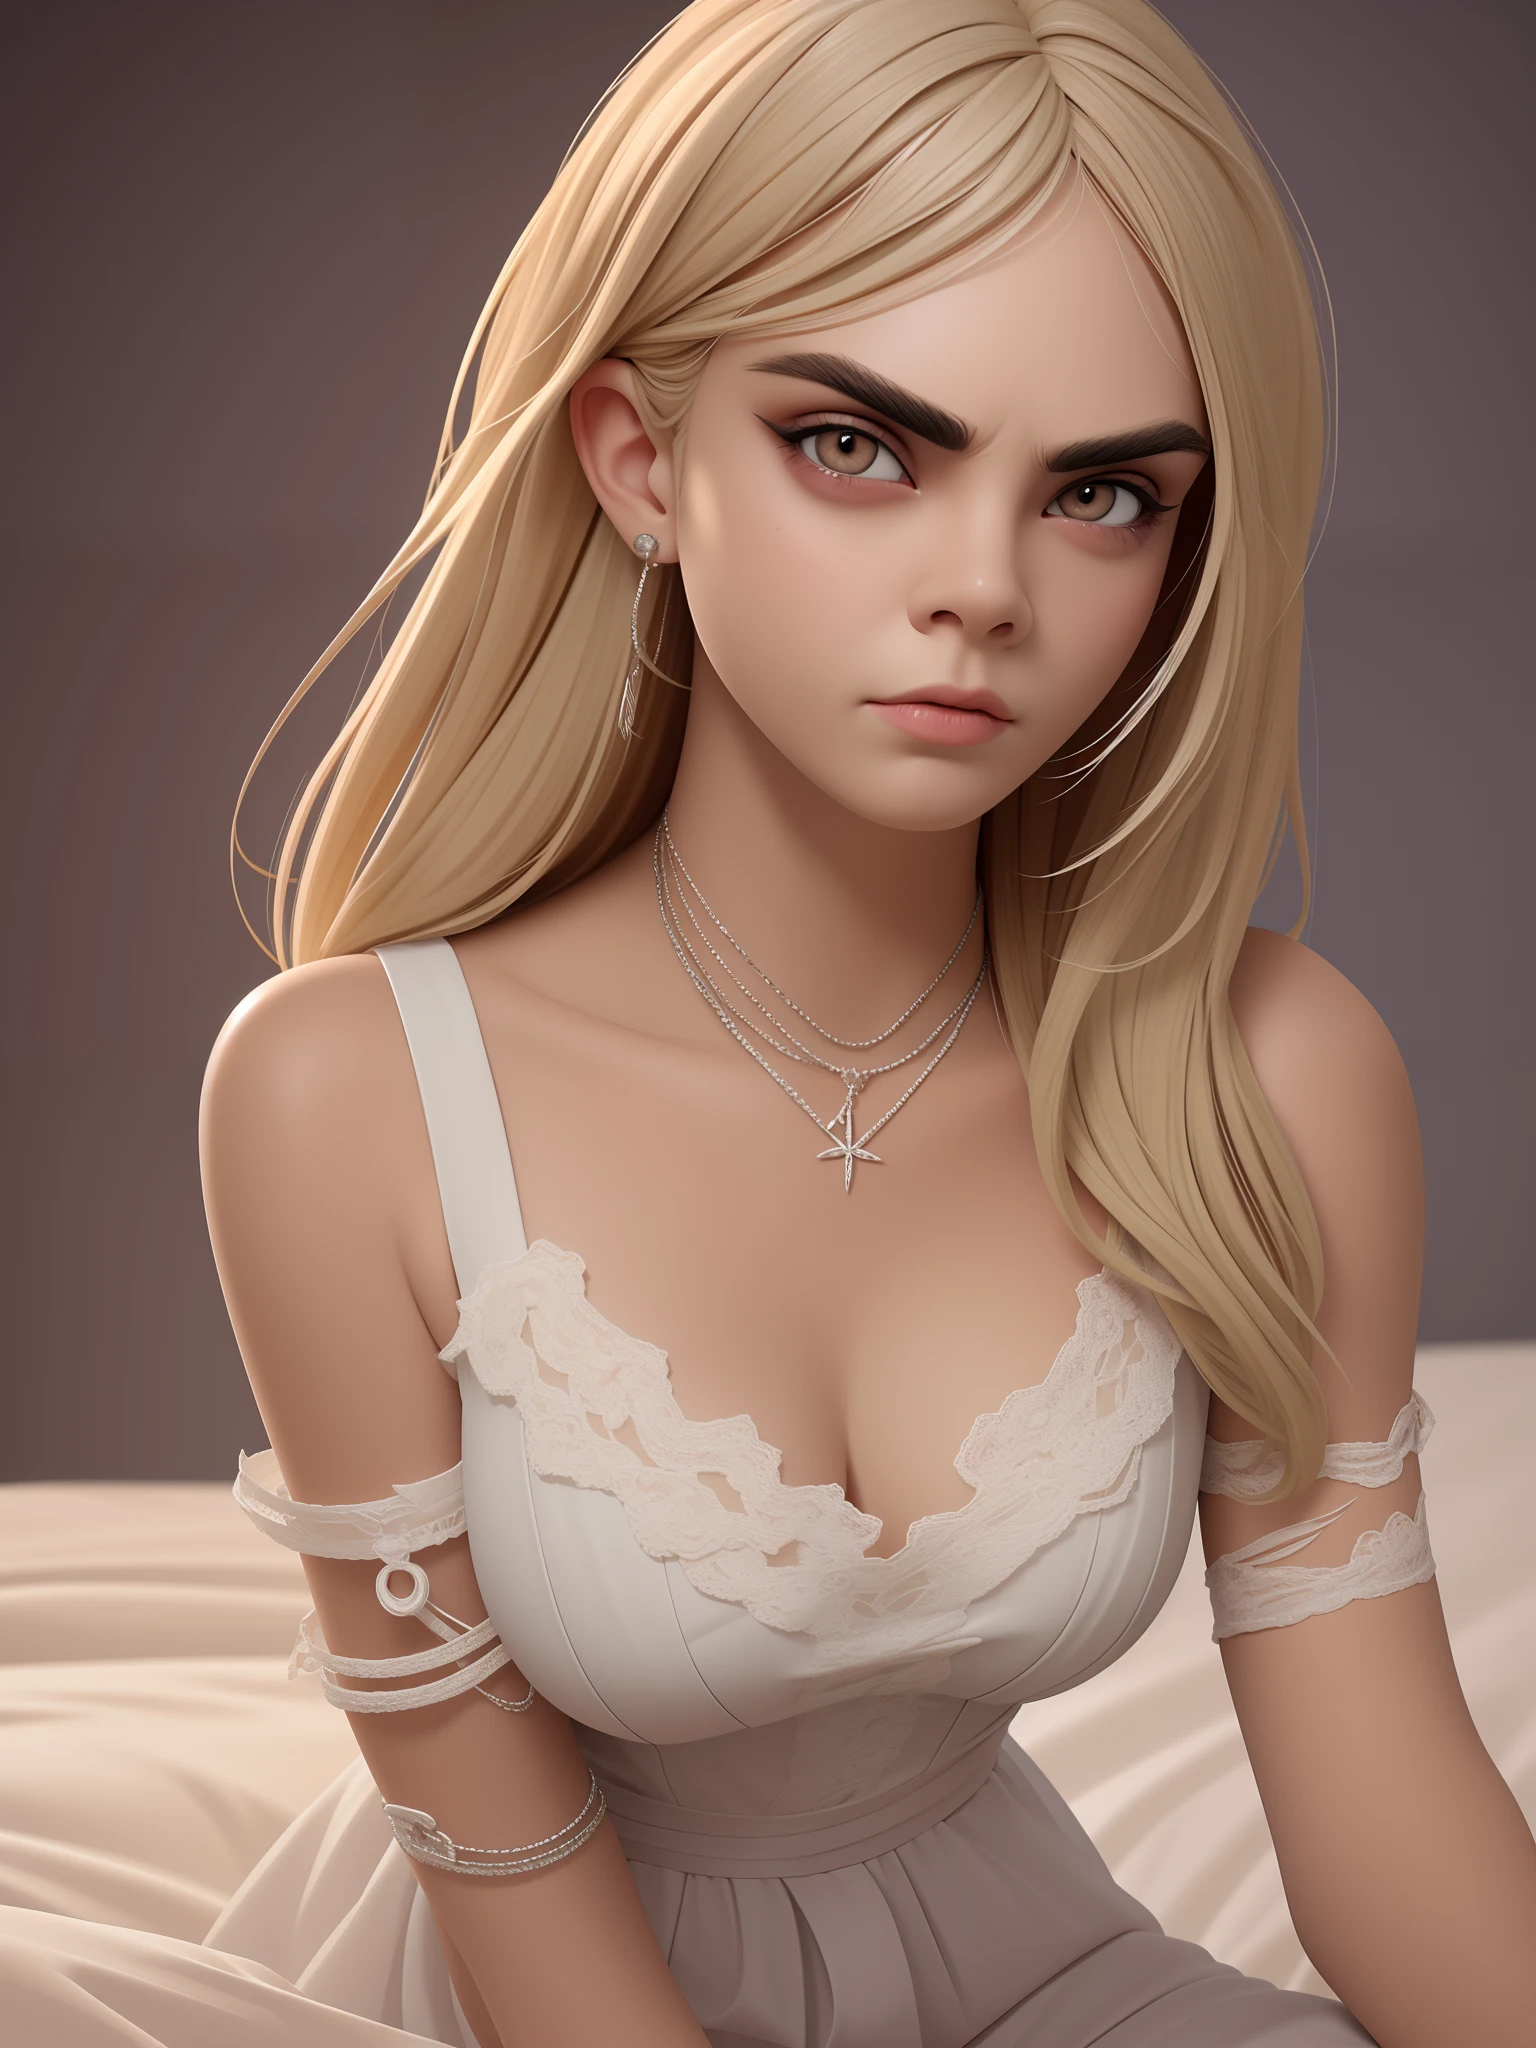 Blonde woman in a white dress sitting on a bed with a necklace, Photorealistic Render of Anime Girl, 3D render character art 8 k, CG anime soft art, April render, cute detailed digital art, deviantart artstation cgscosiety, Smooth 3D CG rendering, Trends on CGVatstation, Detailed digital anime art, High quality 8K detailed art